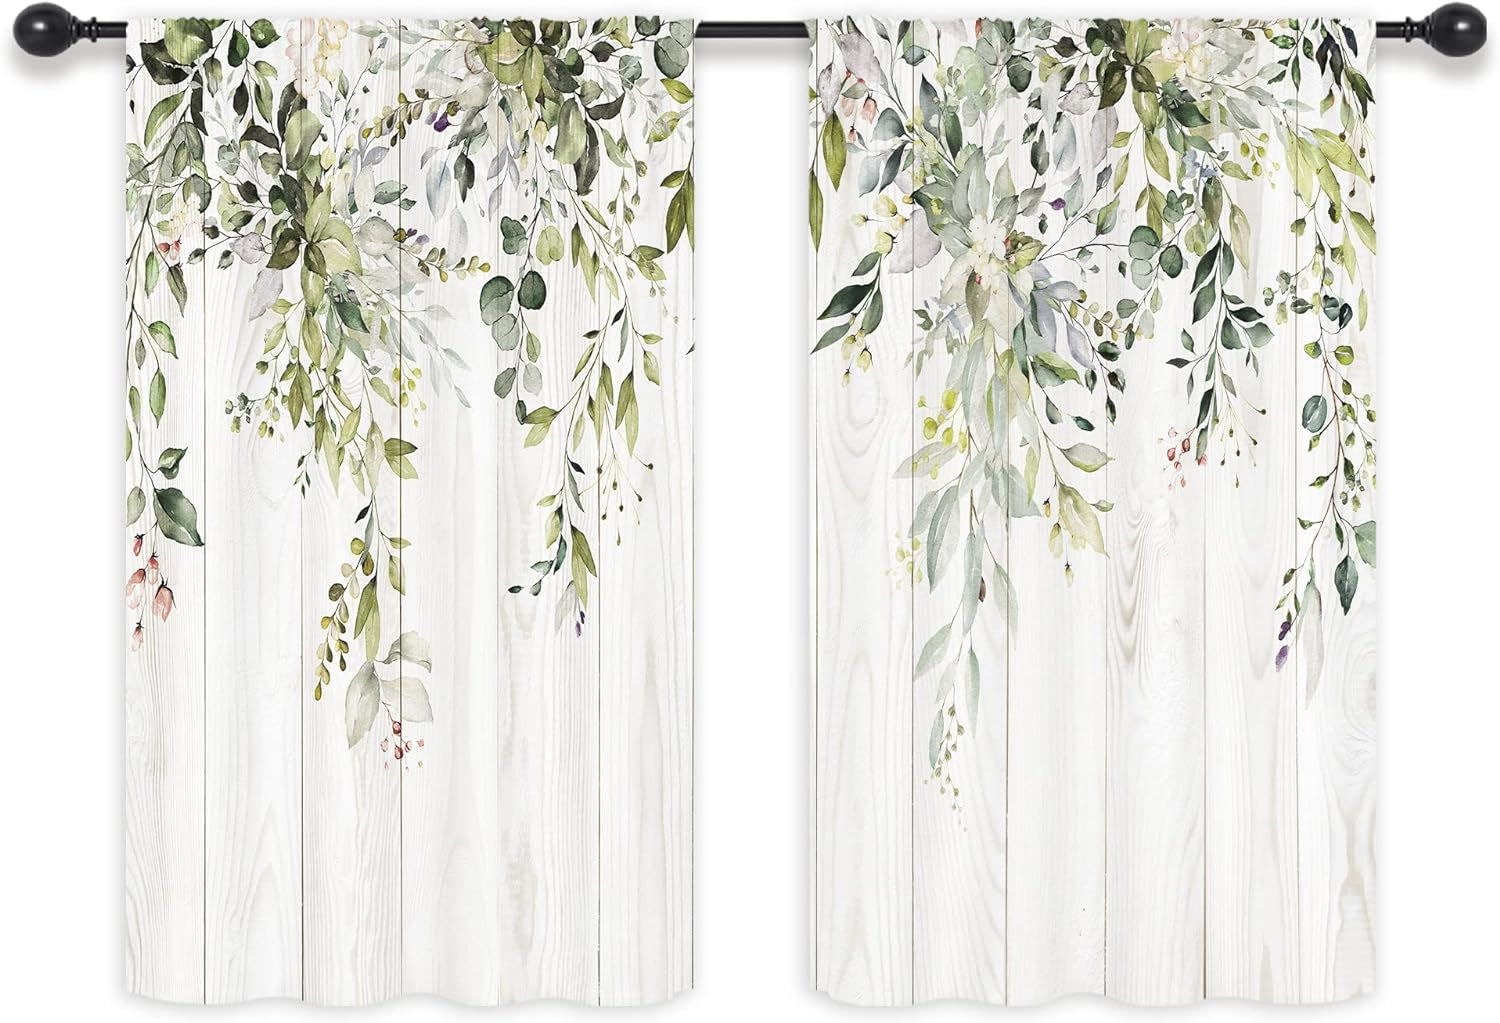 Riyidecor Sage Green Eucalyptus Leaves Kitchen Window Curtains over Sink Flower Floral Spring Botanical Rod Pocket Plant Cafe Curtains for Bathroom Living Room Drapes Treatment Fabric 27.5 X 39 Inch  Pan na   